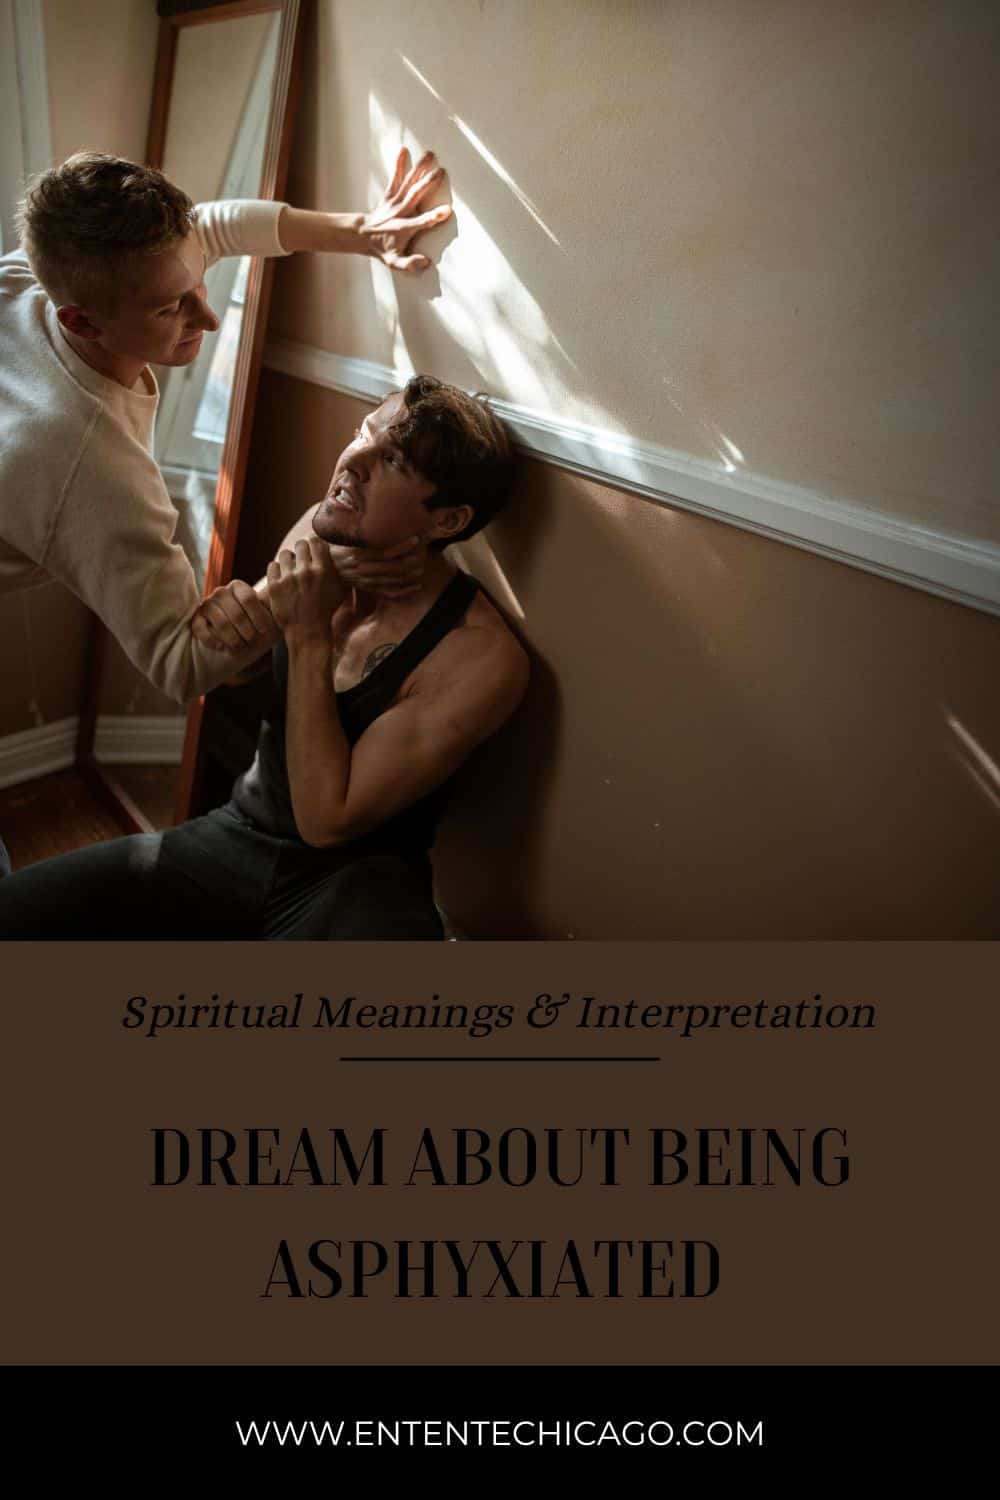 Dream About Being Asphyxiated (Spiritual Meanings & Interpretation)